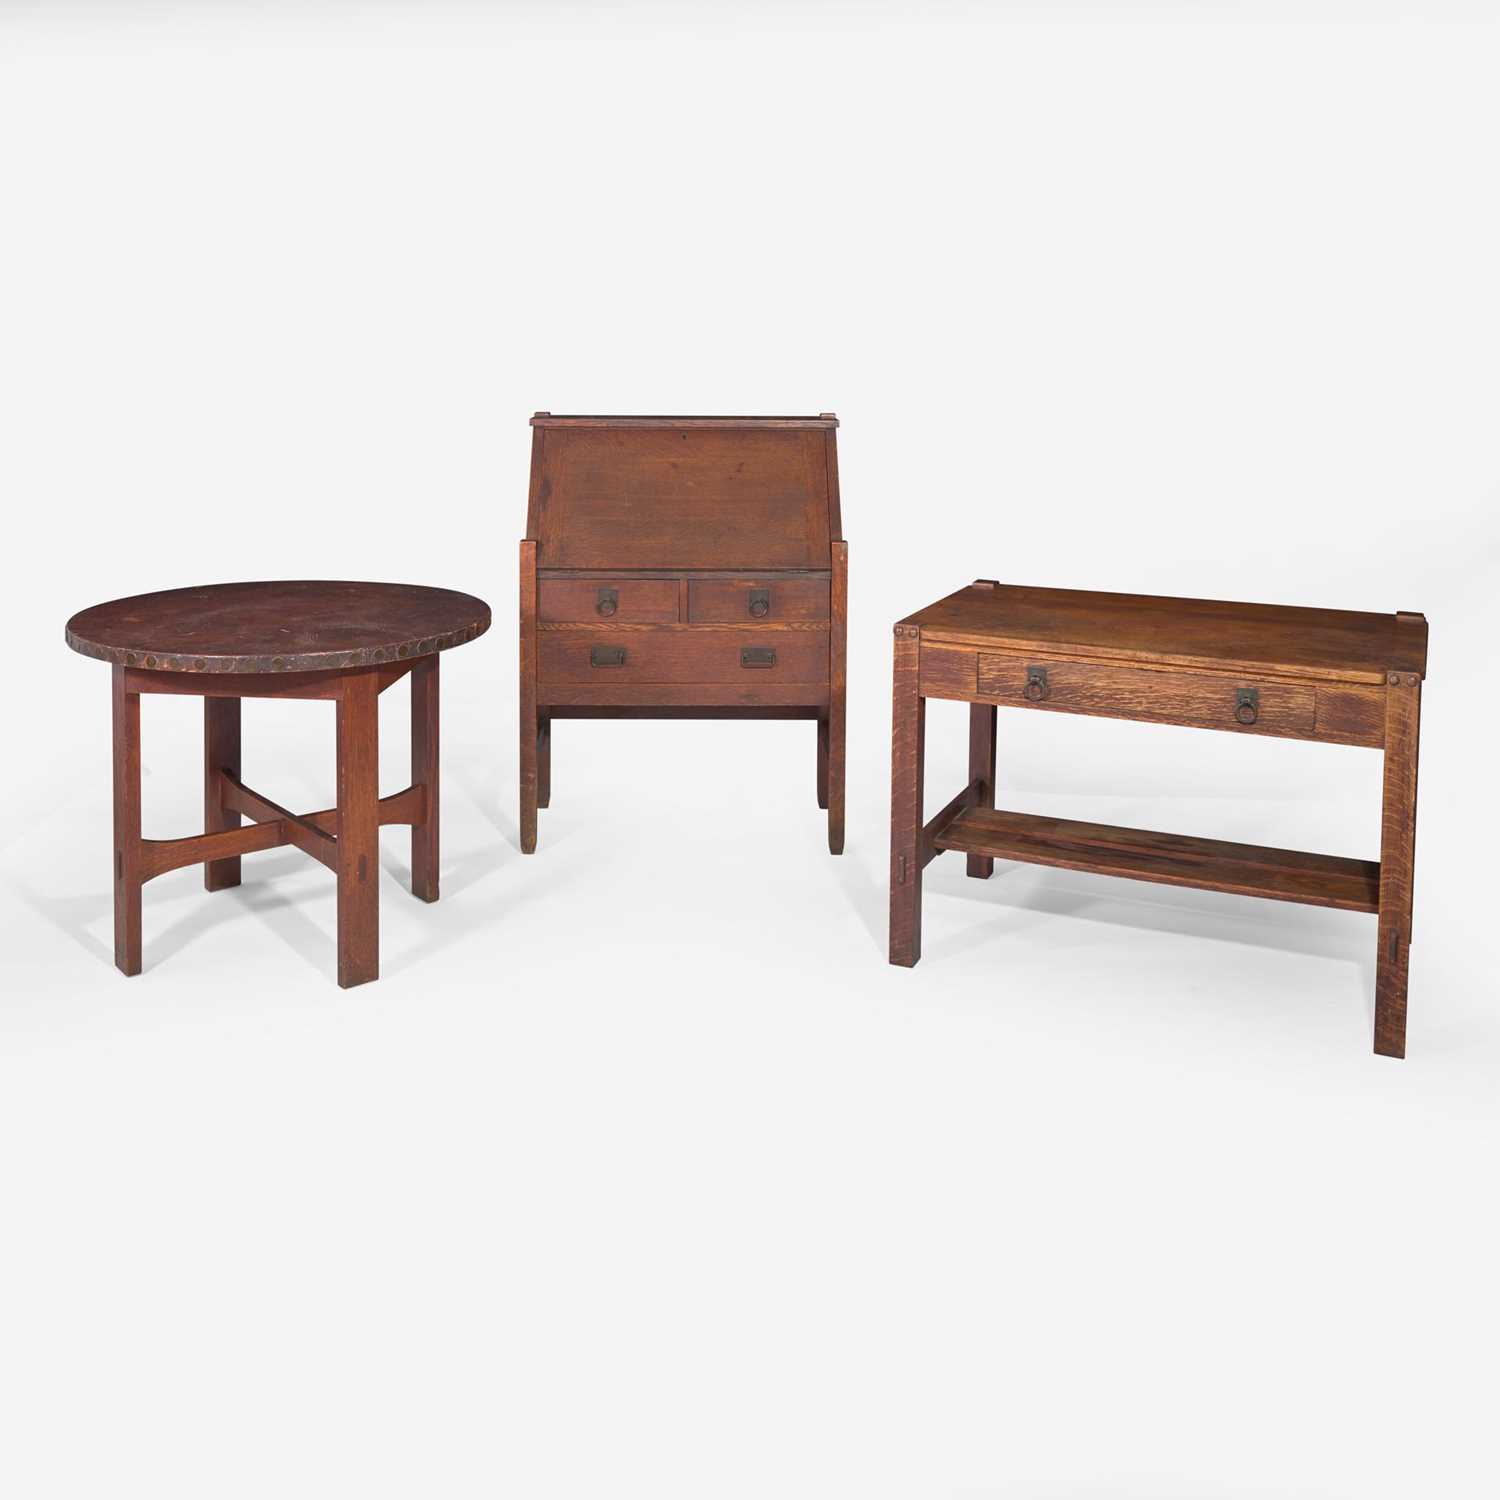 Lot 9 - Stickley Brothers (American, active 1891-1954)